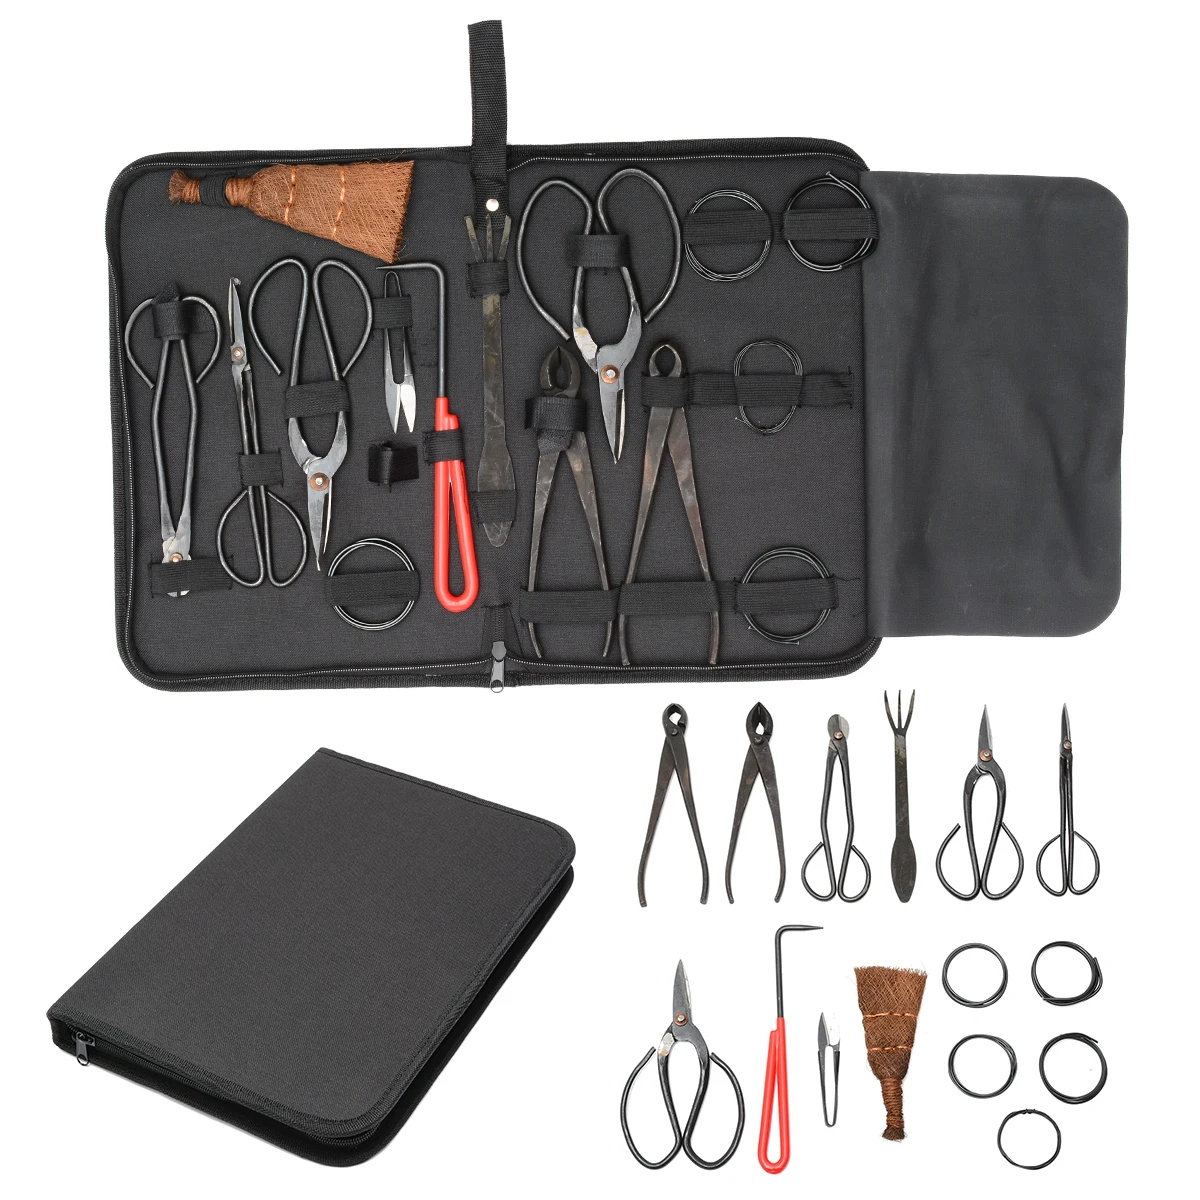 10 Pcs Bonsai Tool Set Carbon Steel Extensive Cutter Scissors Kit With Nylon Case Home Garden Pruning Tools Selected Combinati